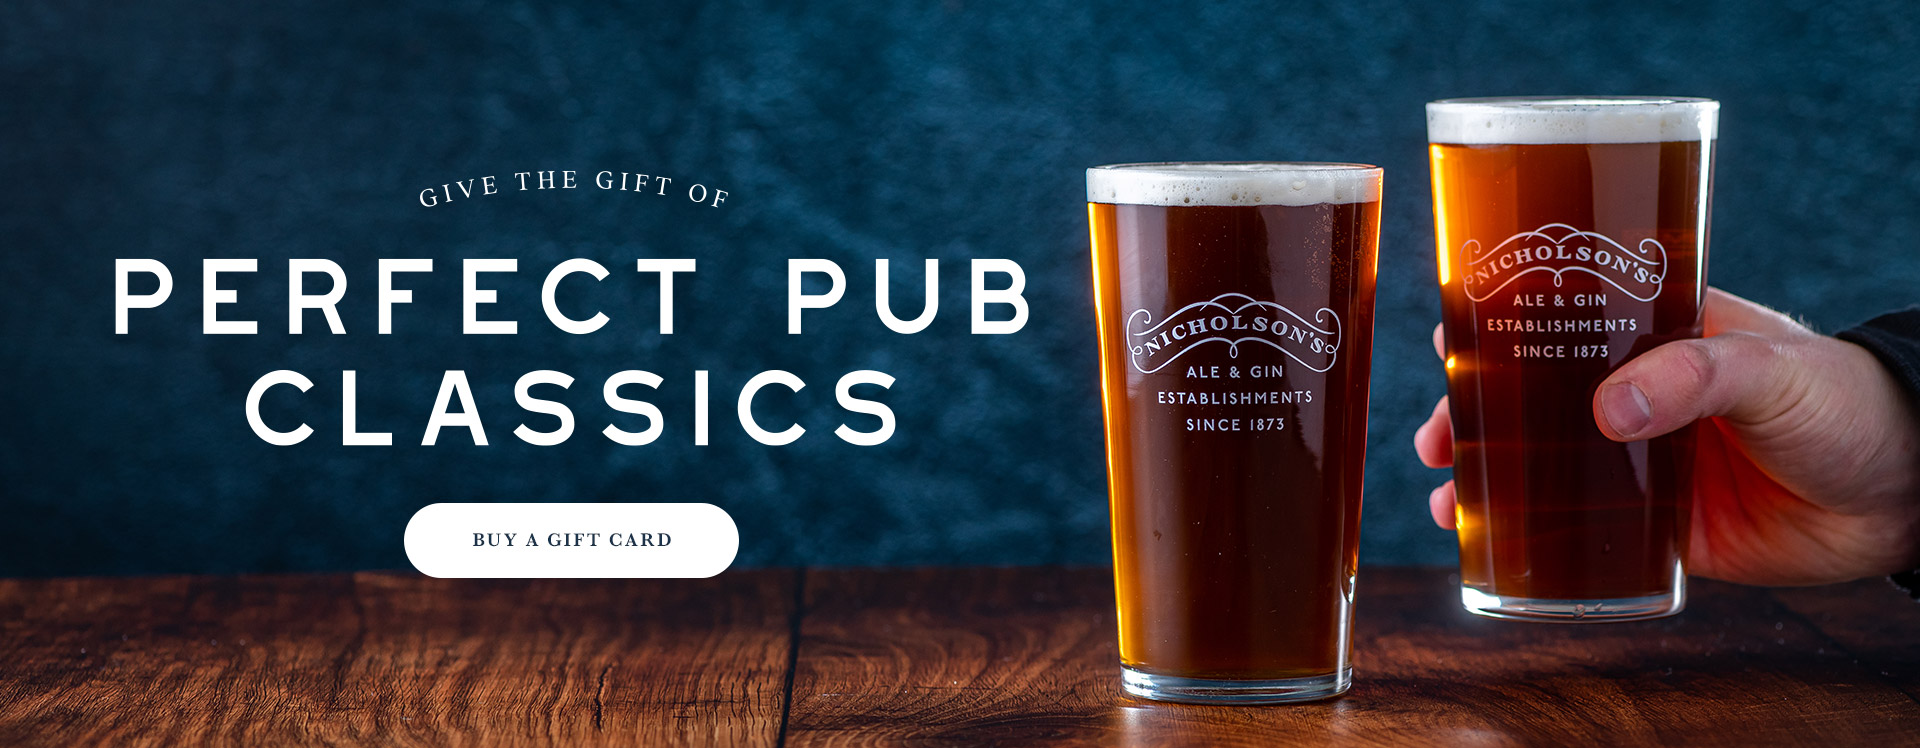 Nicholson’s Pub Gift Voucher at The Dog and Duck in London